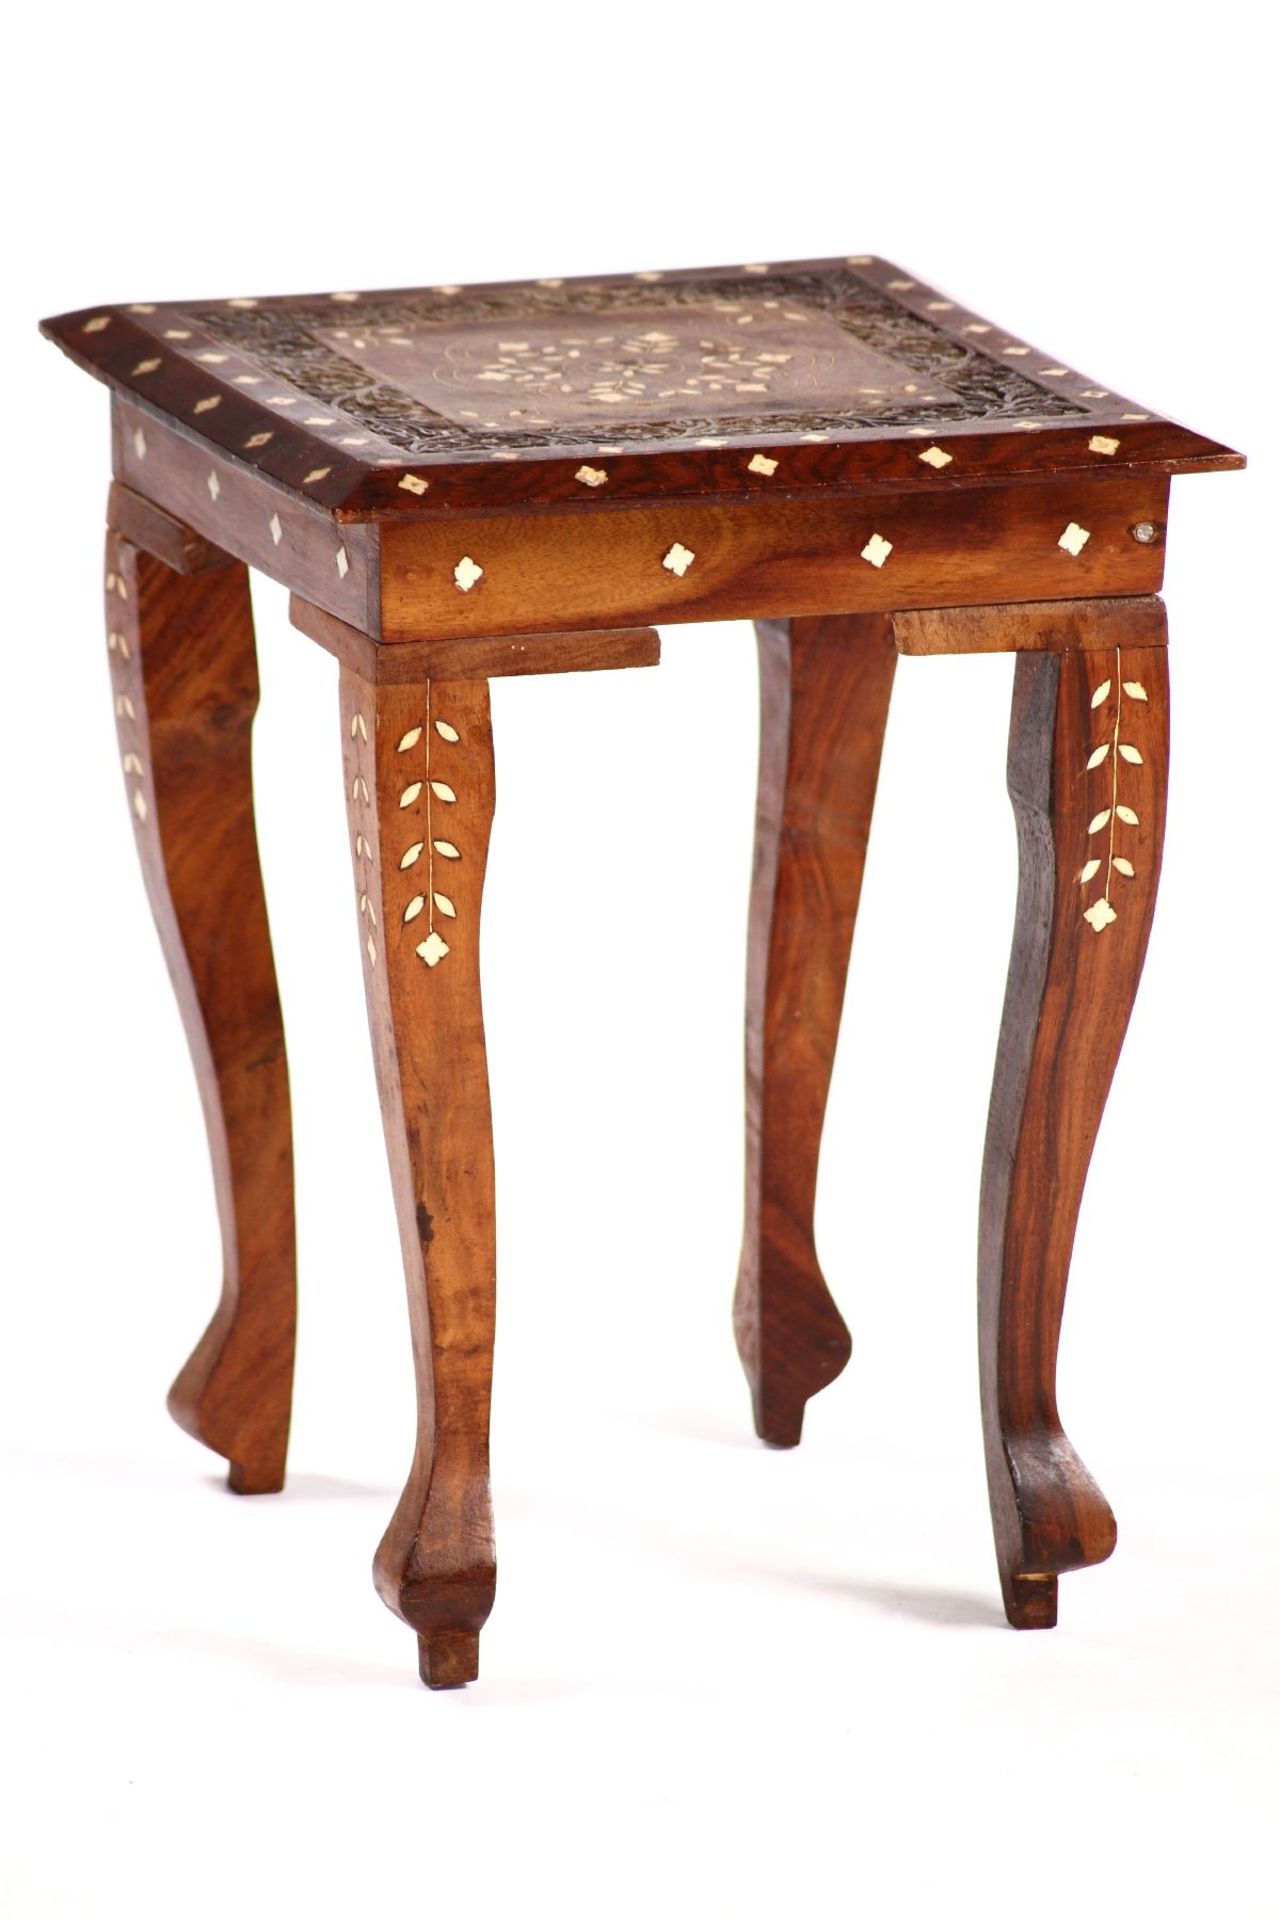 Side table, solid wood, stained dark brown, curved legs, decorative inlays made of leg in the form